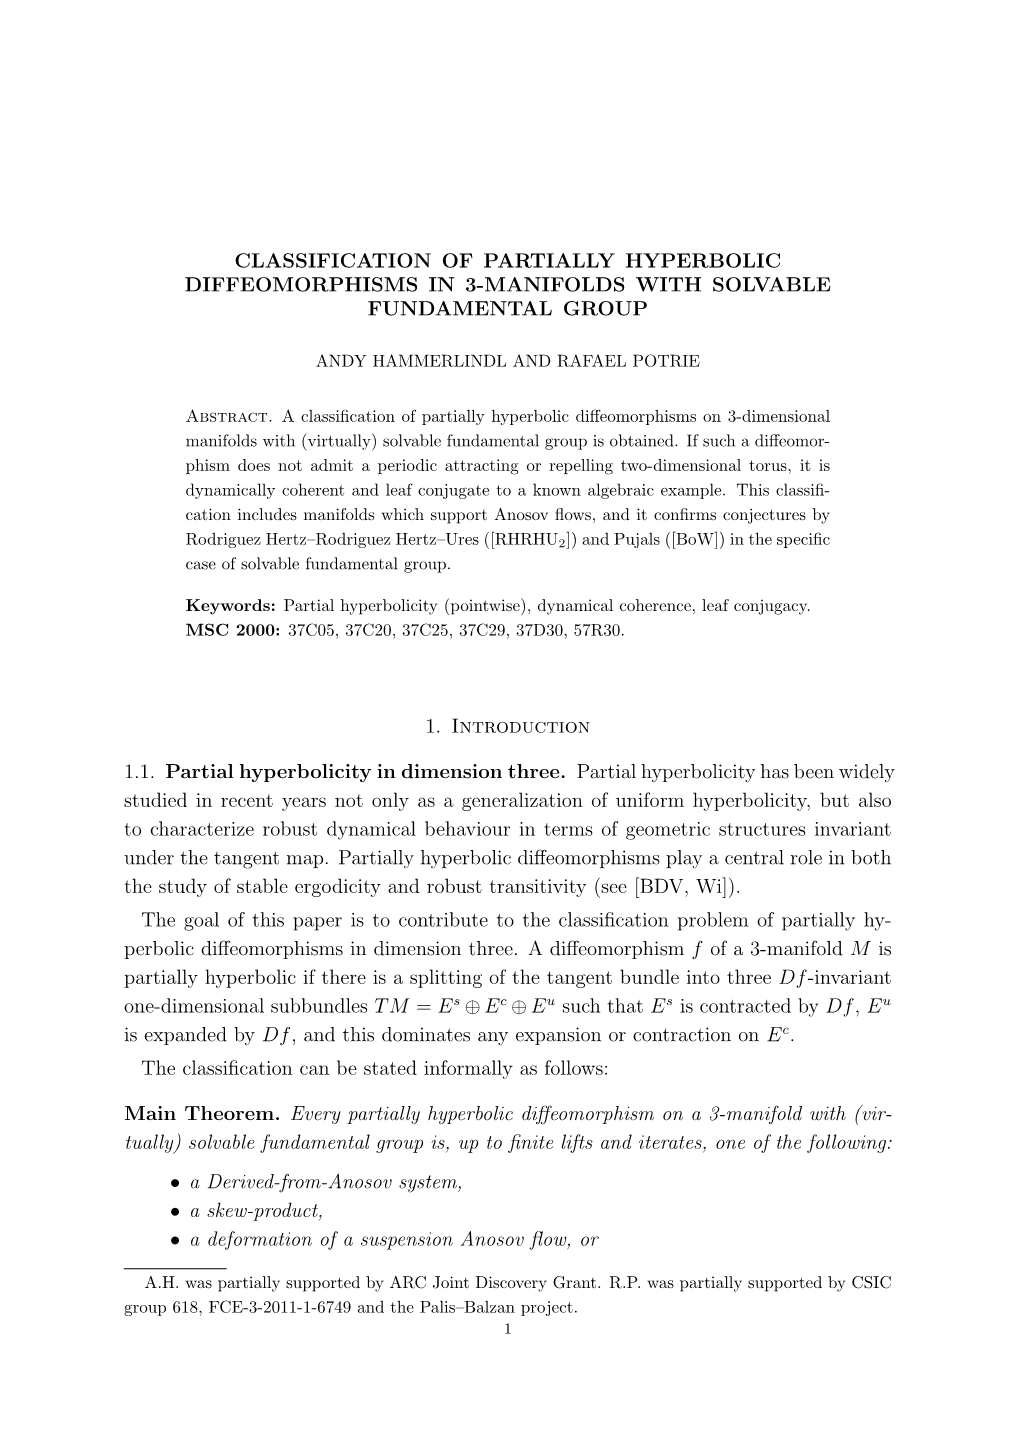 Classification of Partially Hyperbolic Diffeomorphisms in 3-Manifolds with Solvable Fundamental Group